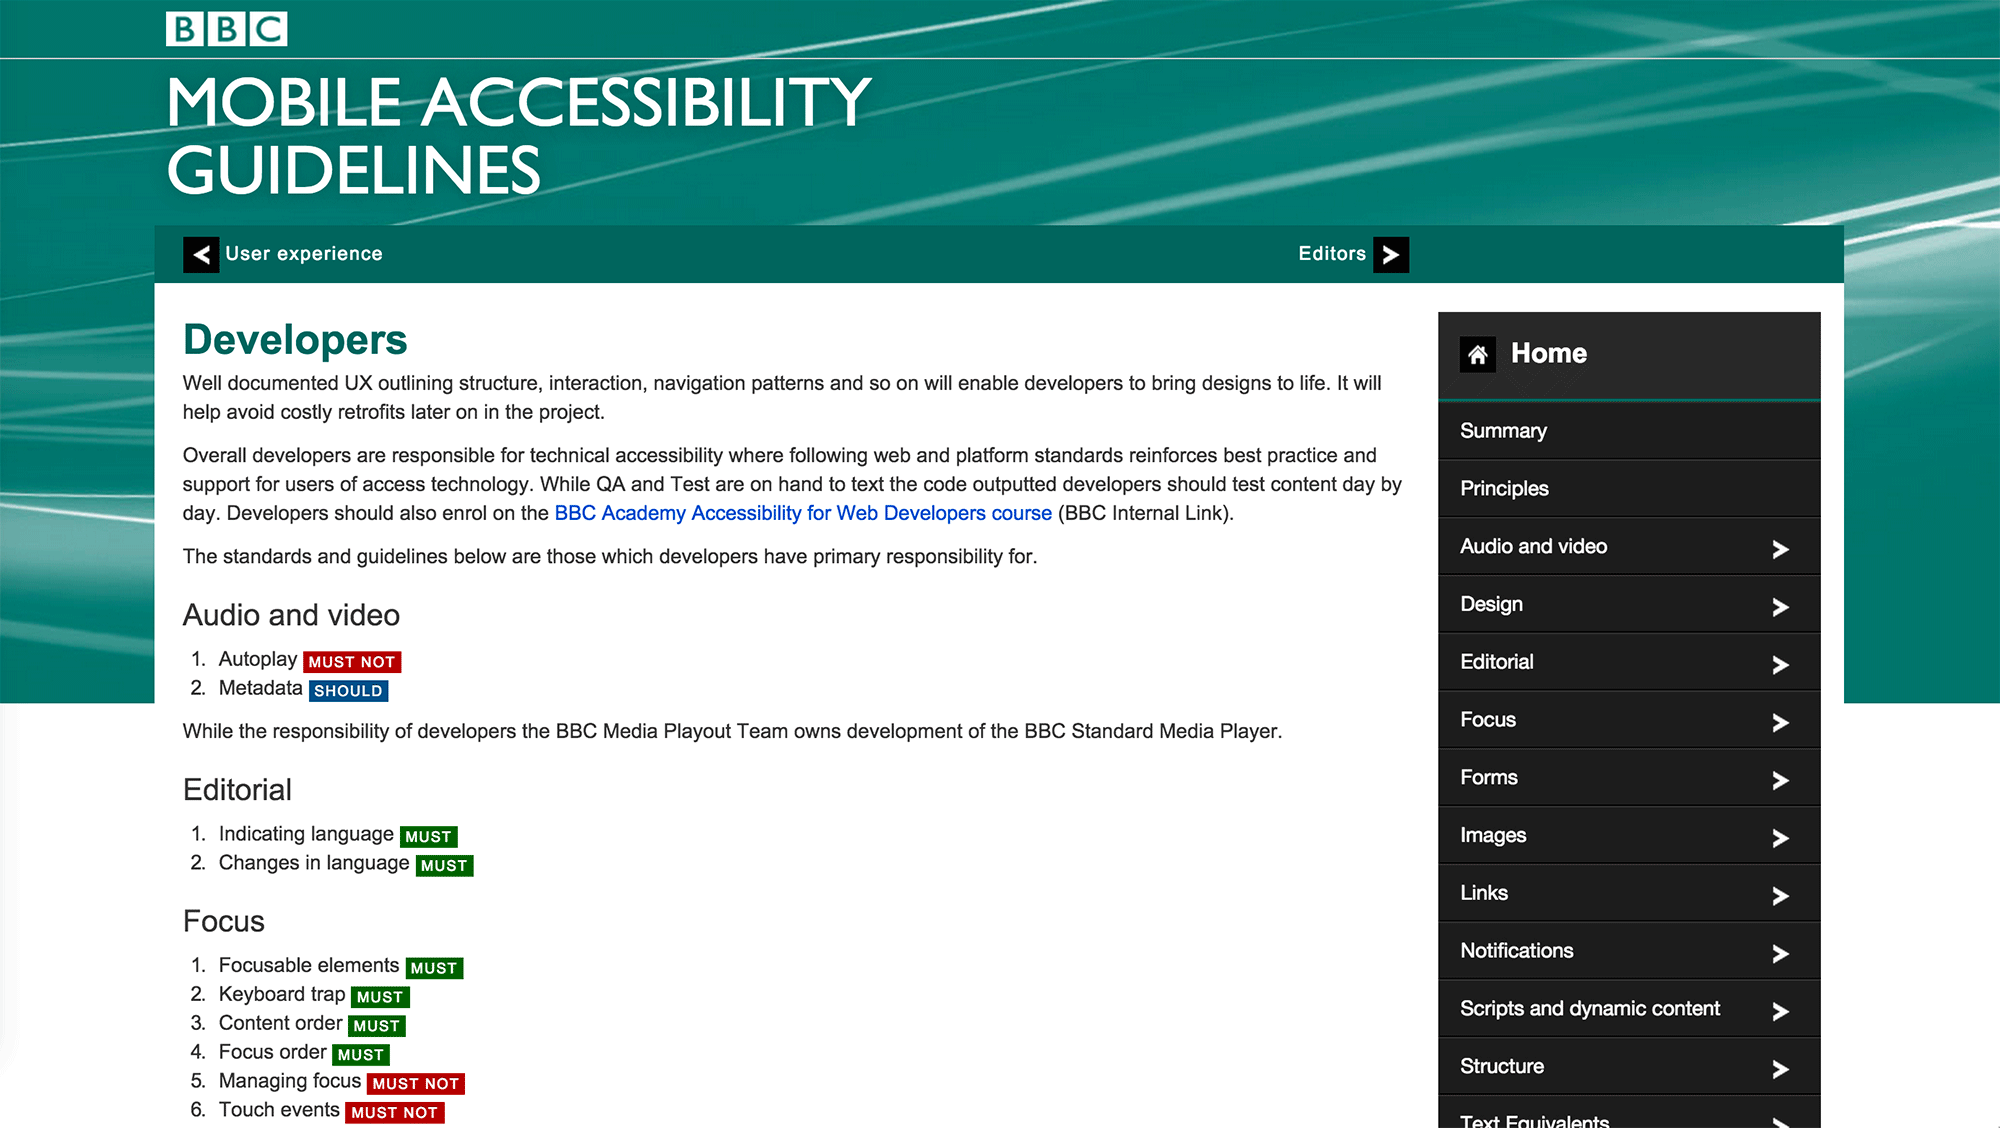 BBC Mobile Accessibility Guidelines for Developers